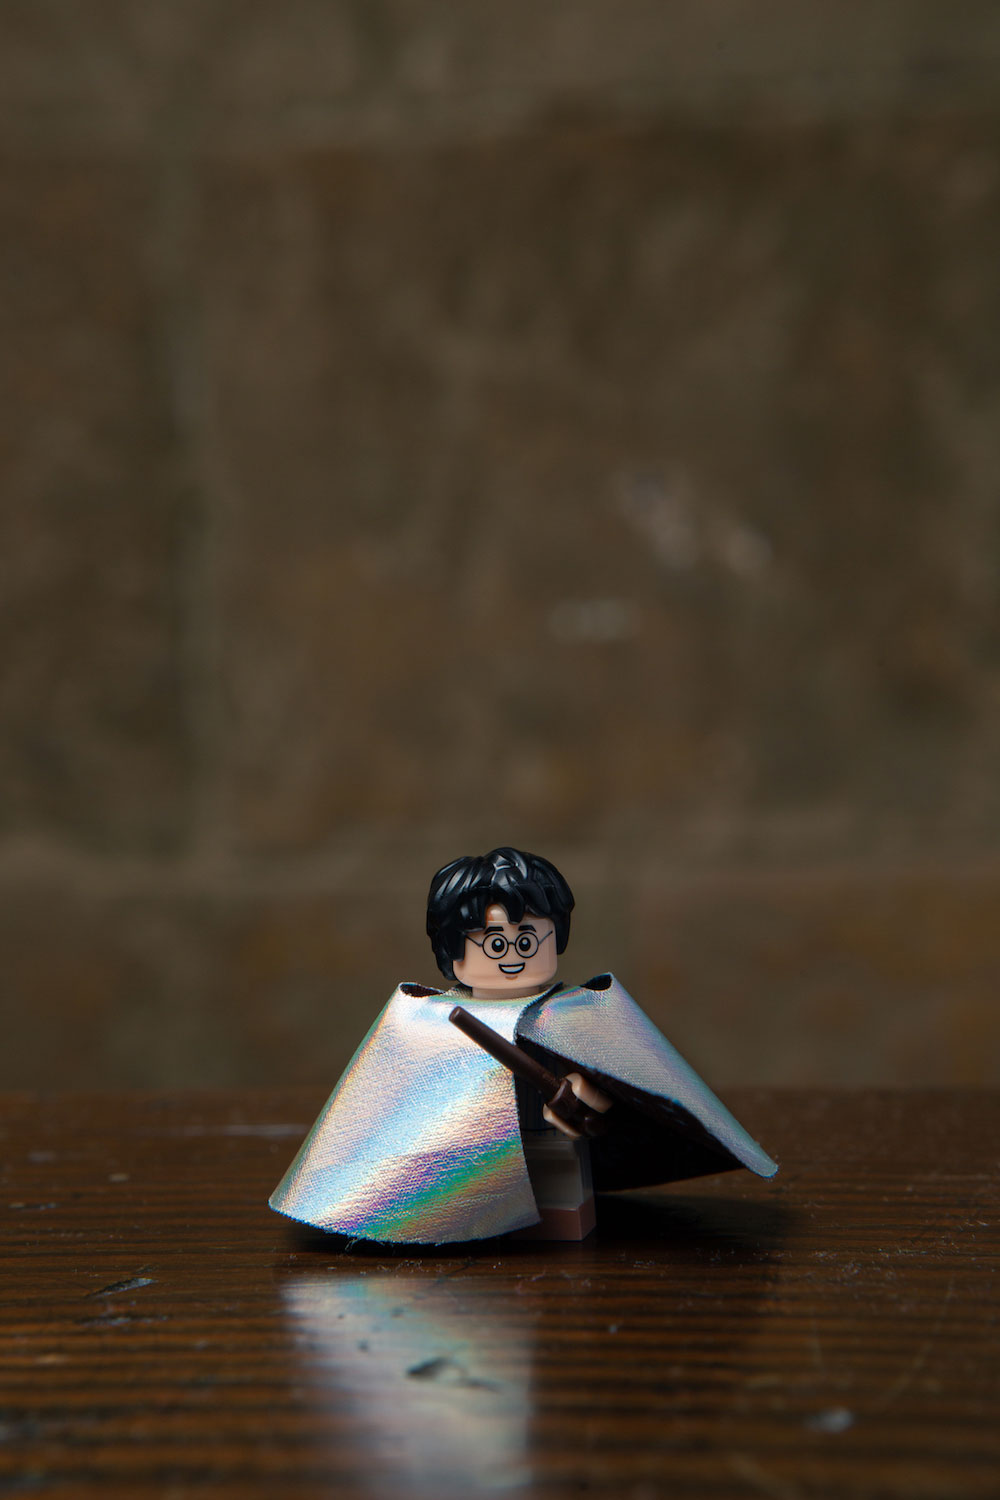 Harry is featured twice in the LEGO minifigures series (why not? He’s the title character) – in this case, in his PJs with his Invisibility Cloak.